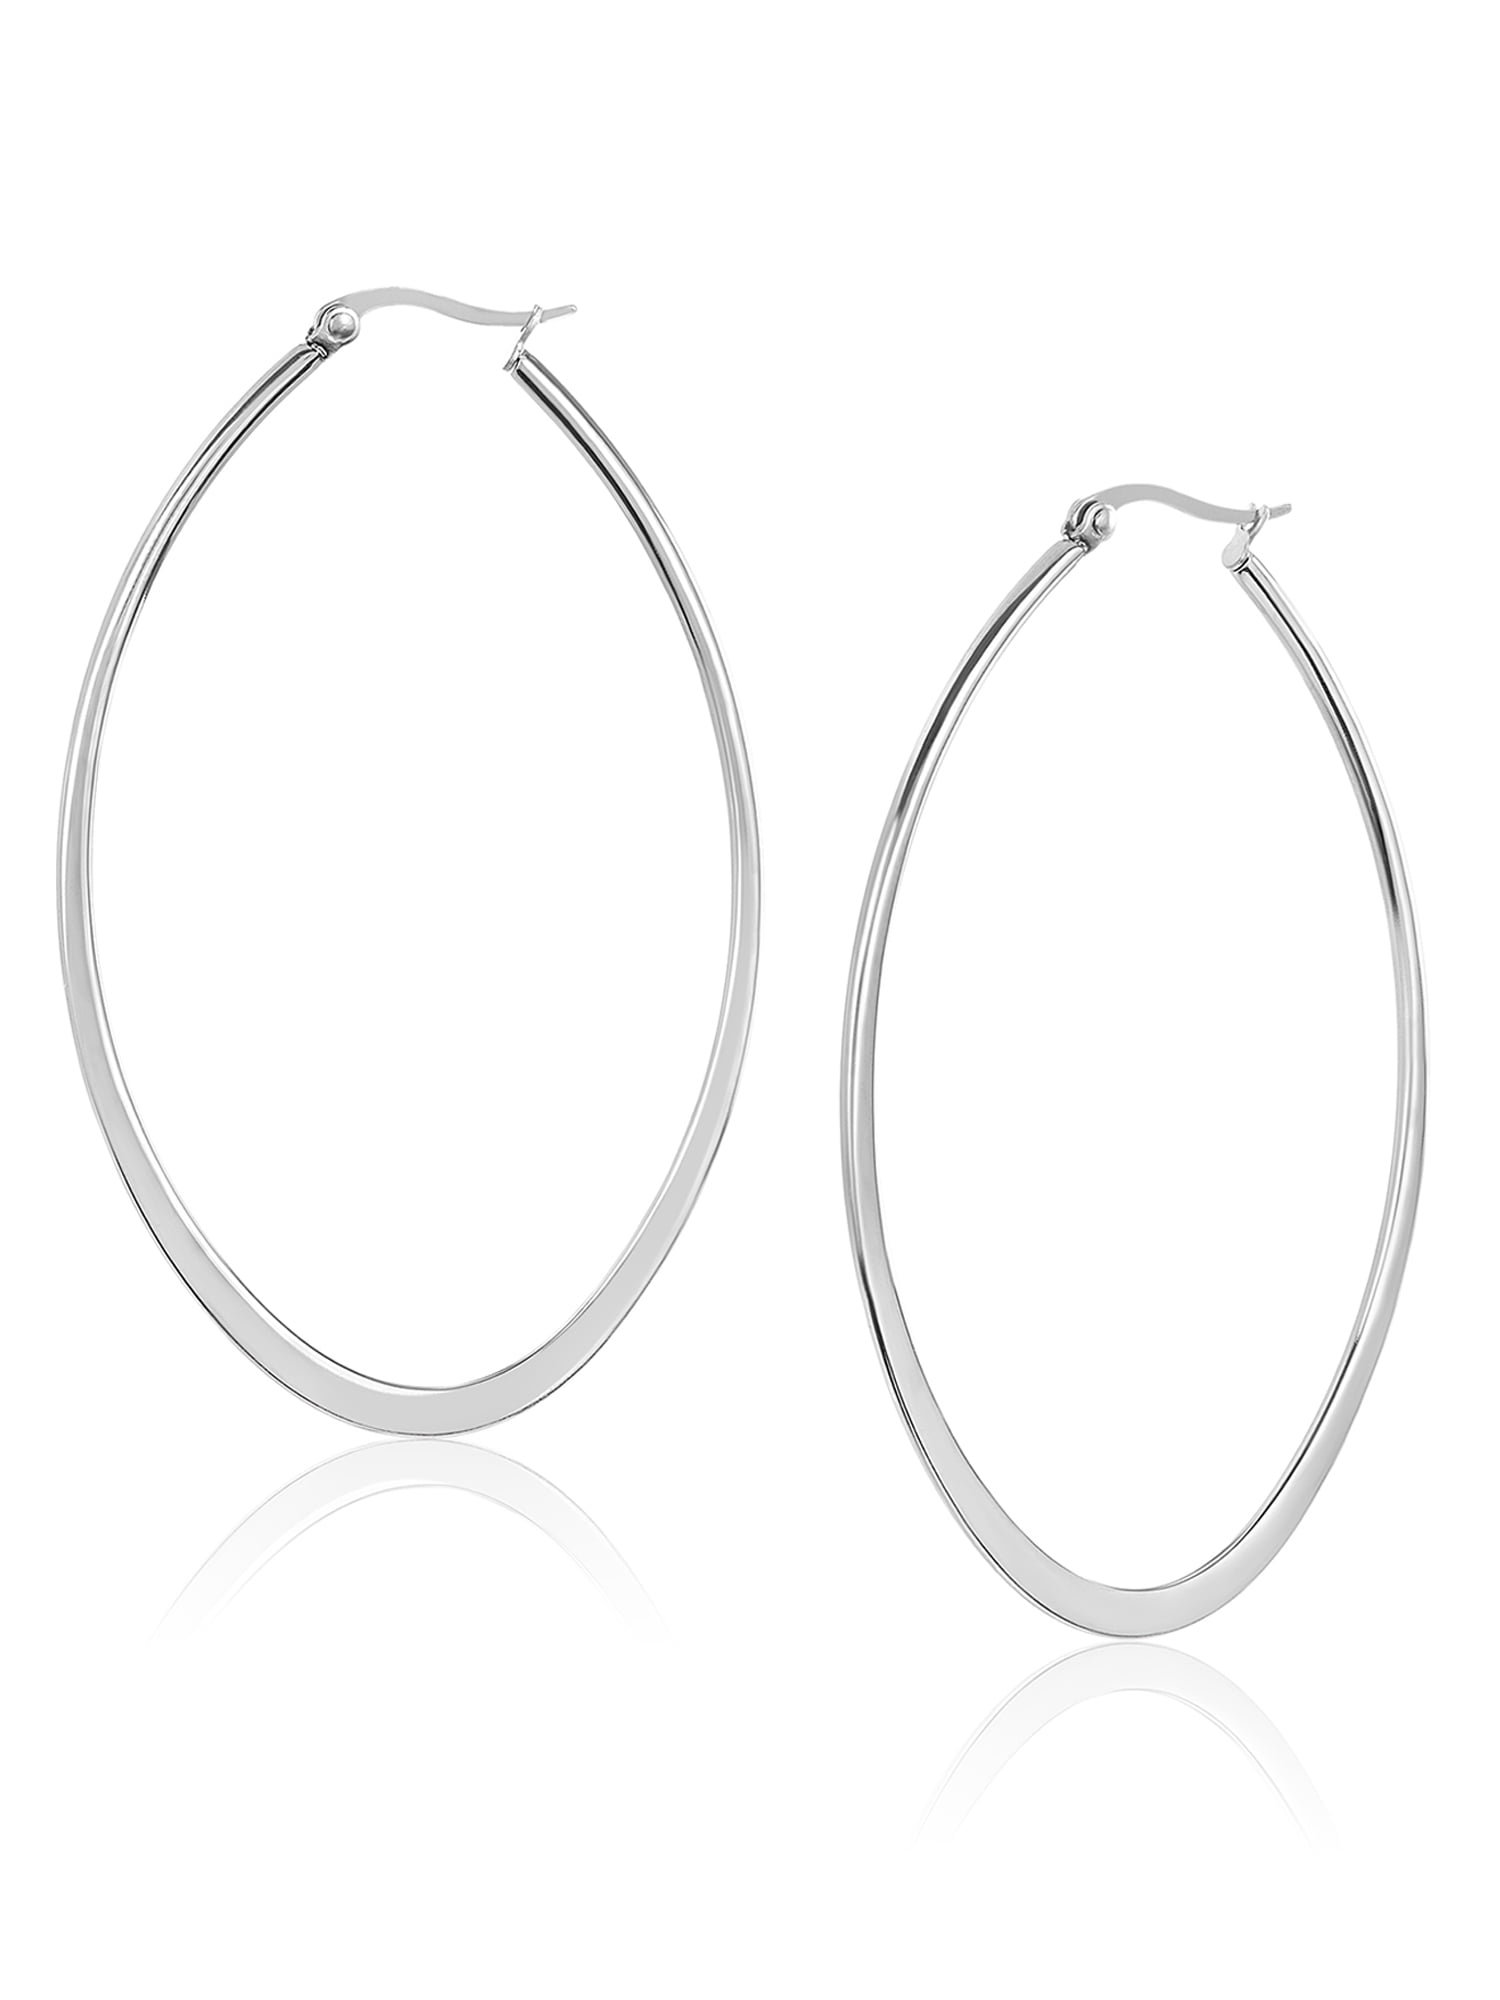 BIG BOLD STAINLESS STEEL HOLLOW HOOP OVAL EARRINGS 3" X 2.5" 1/2" THICK 